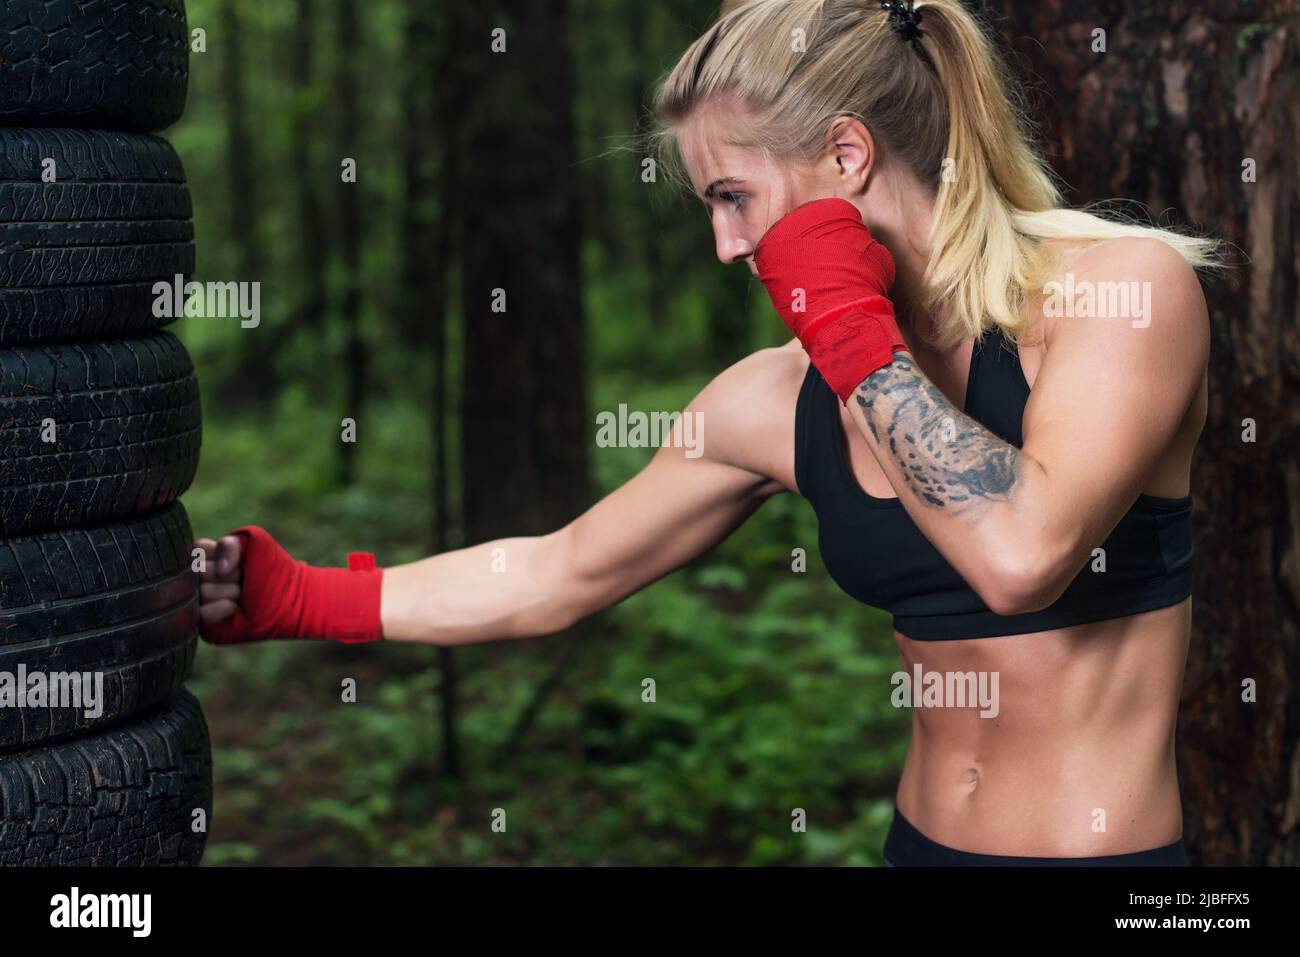 Portrait of girl boxer doing uppercut kick working out outdoors Stock Photo